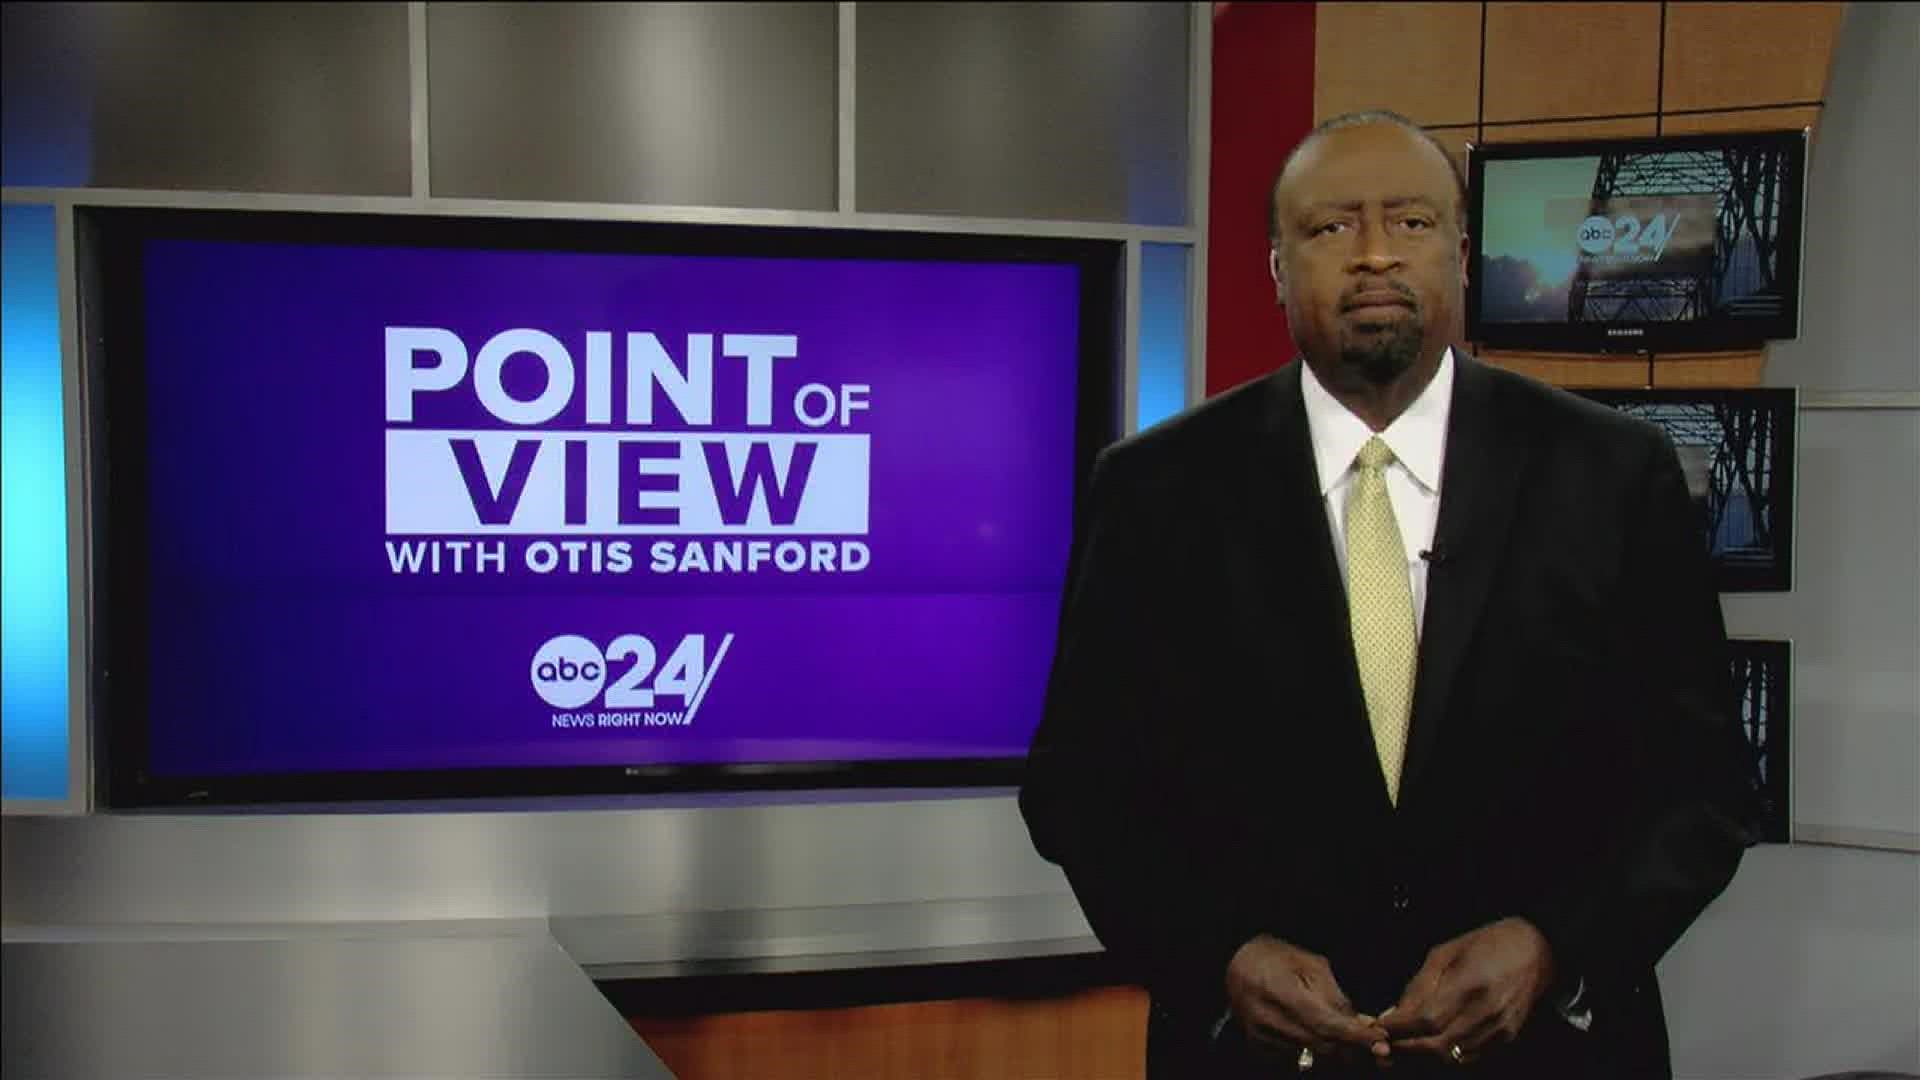 ABC 24 political analyst and commentator Otis Sanford shared his point of view on recent behavior at a Memphis City Council meeting.